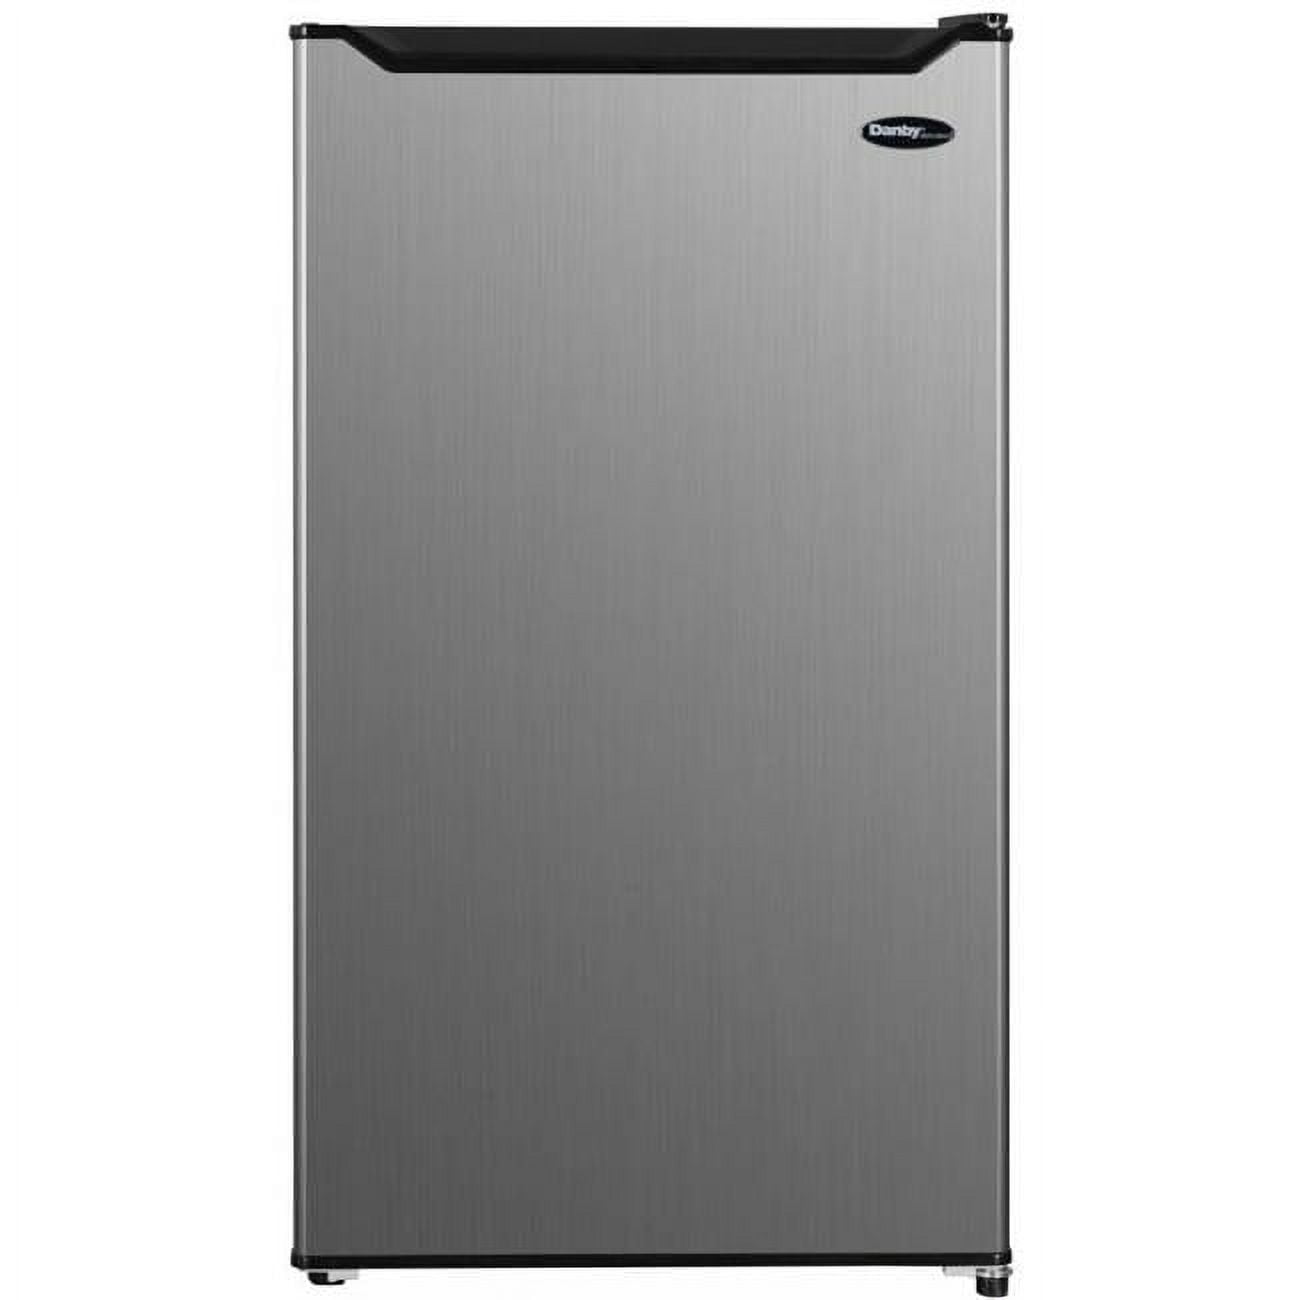 UPC 067638000710 product image for DAR032B2SLM 3.2 cu. ft. Compact Refrigerator - Stainless Steel | upcitemdb.com